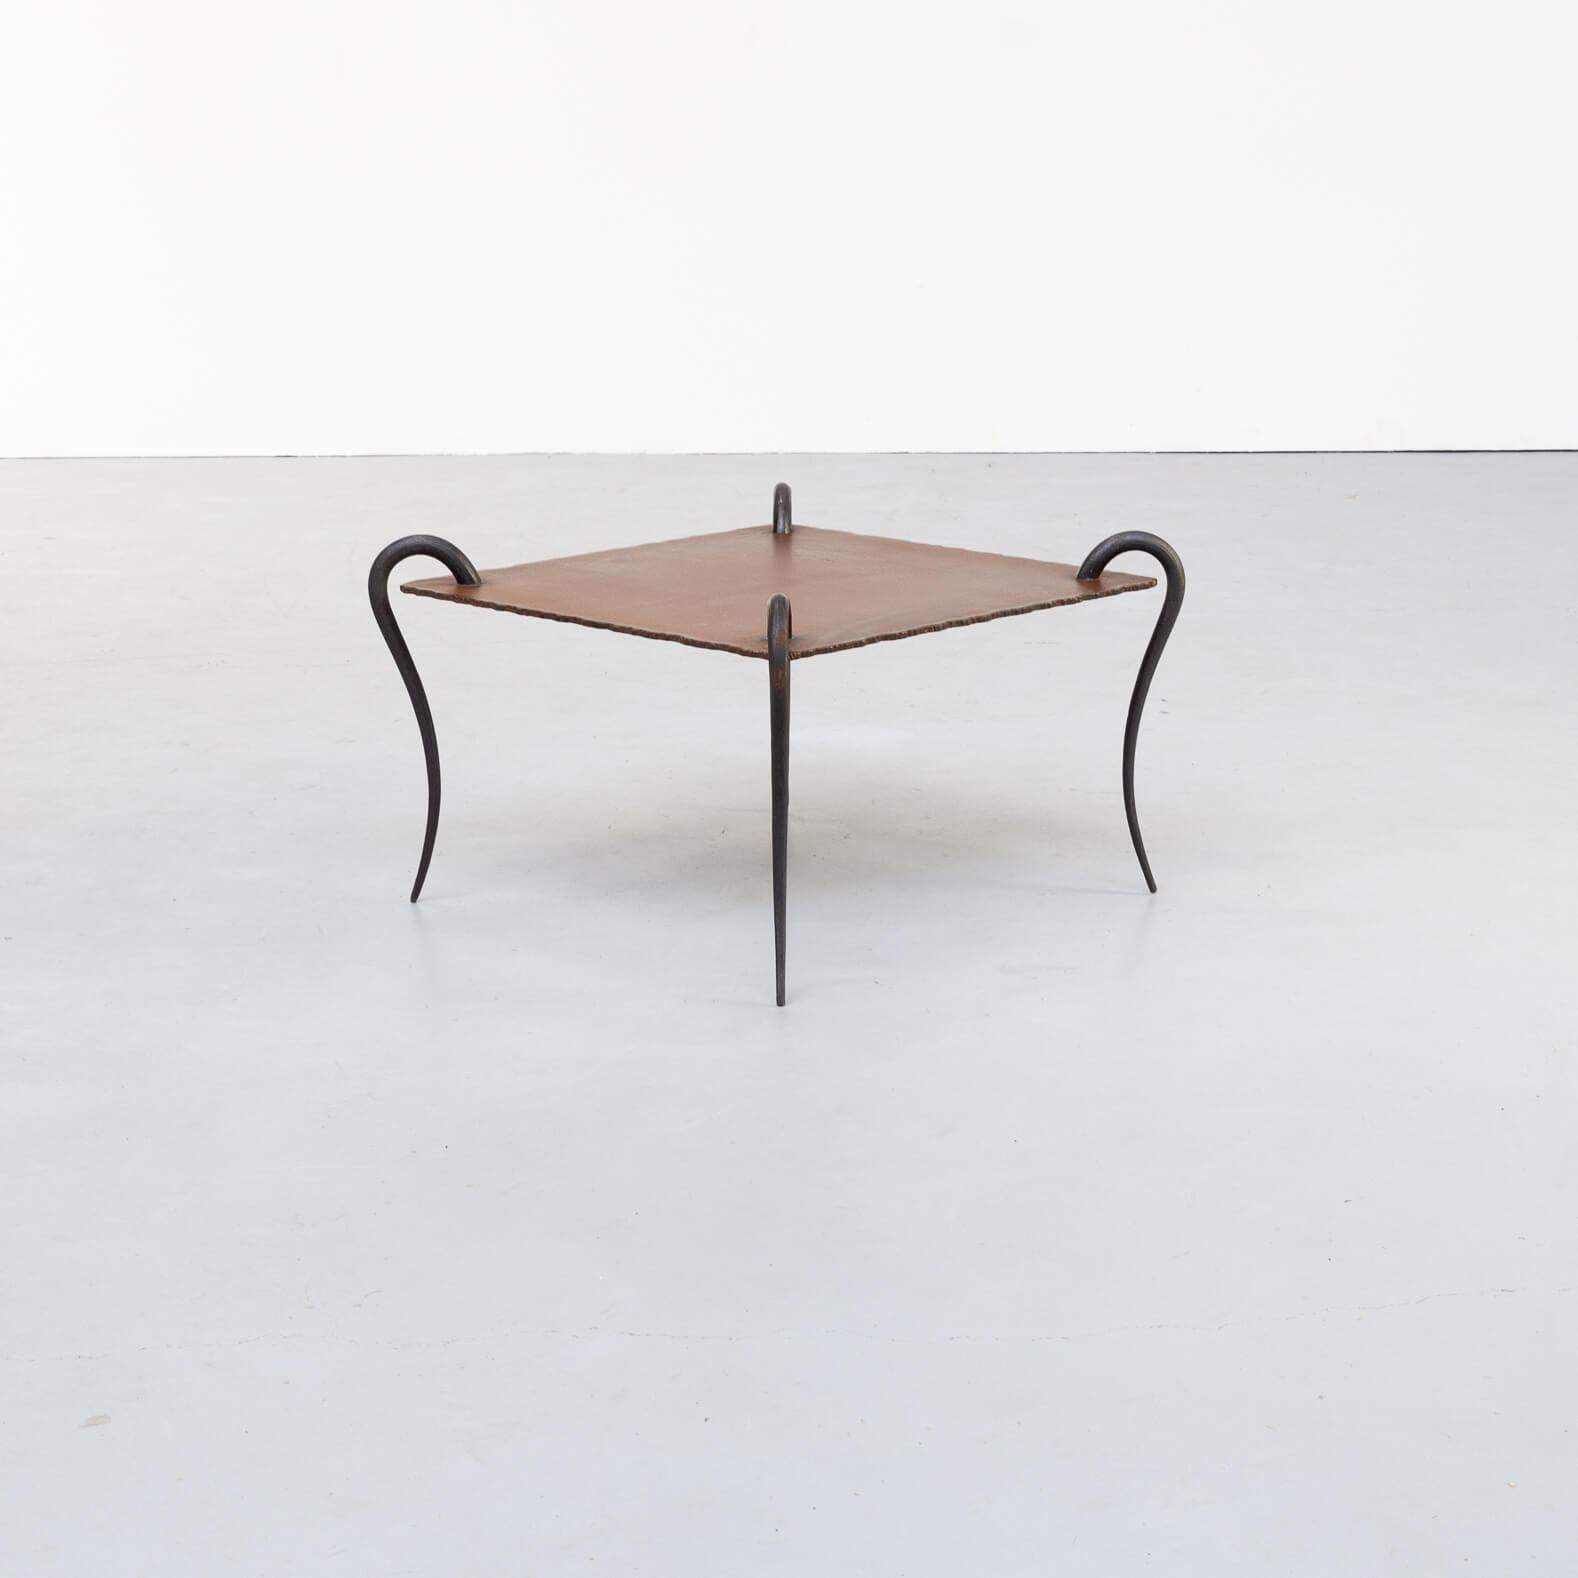 90s Brutalist side or small coffee table by Idir Mecibah (1958-2013), produced by Smederij Moerman 1998. This solid steel table is from the scrab series. Mecibah designed the scrab series in the late 1980s and the table has been produced till the